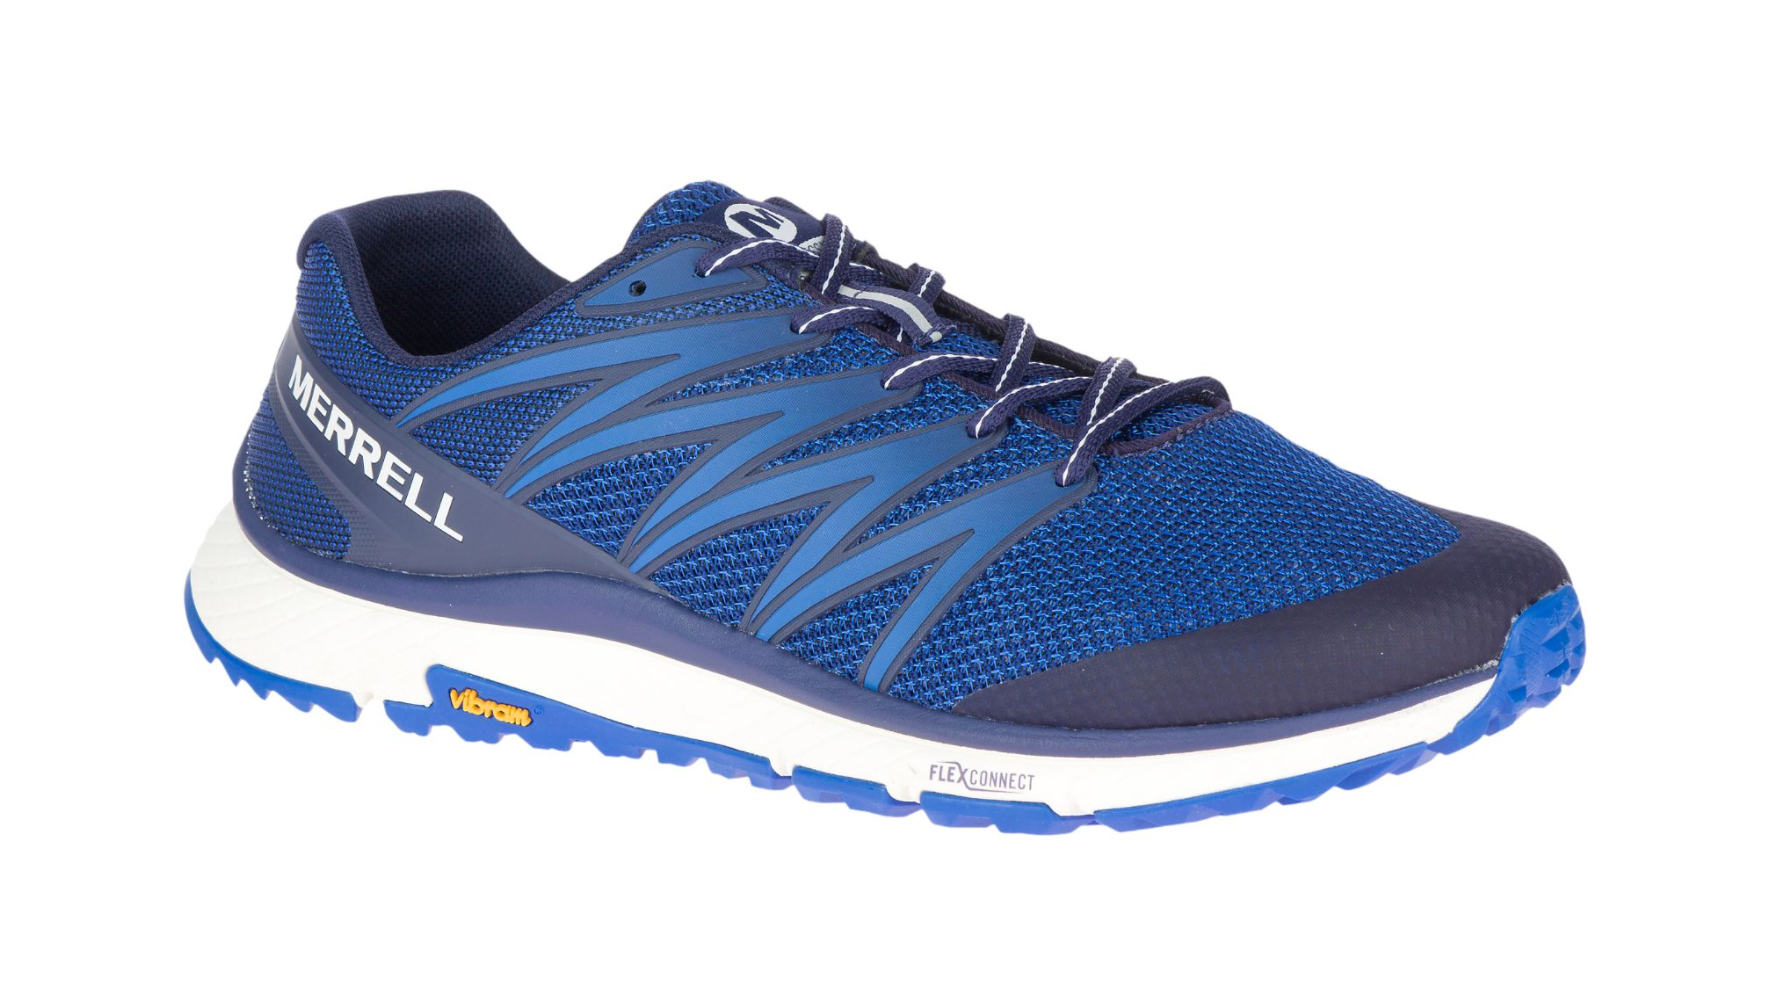 Merrell Bare Access XTR - 100k Thoughts